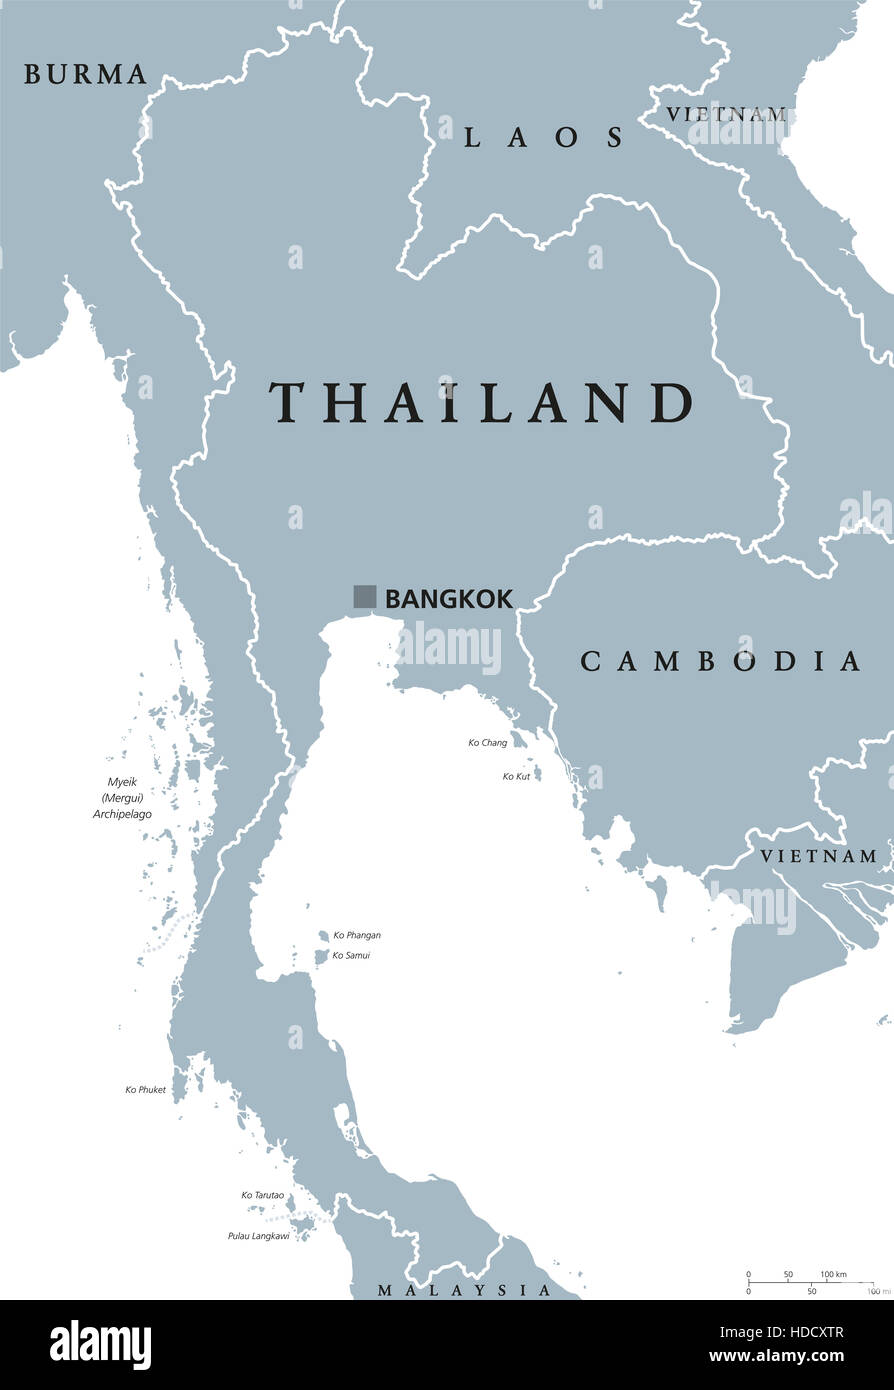 Thailand political map with capital Bangkok and national borders. Kingdom at Indochinese peninsula in Southeast Asia. Stock Photo